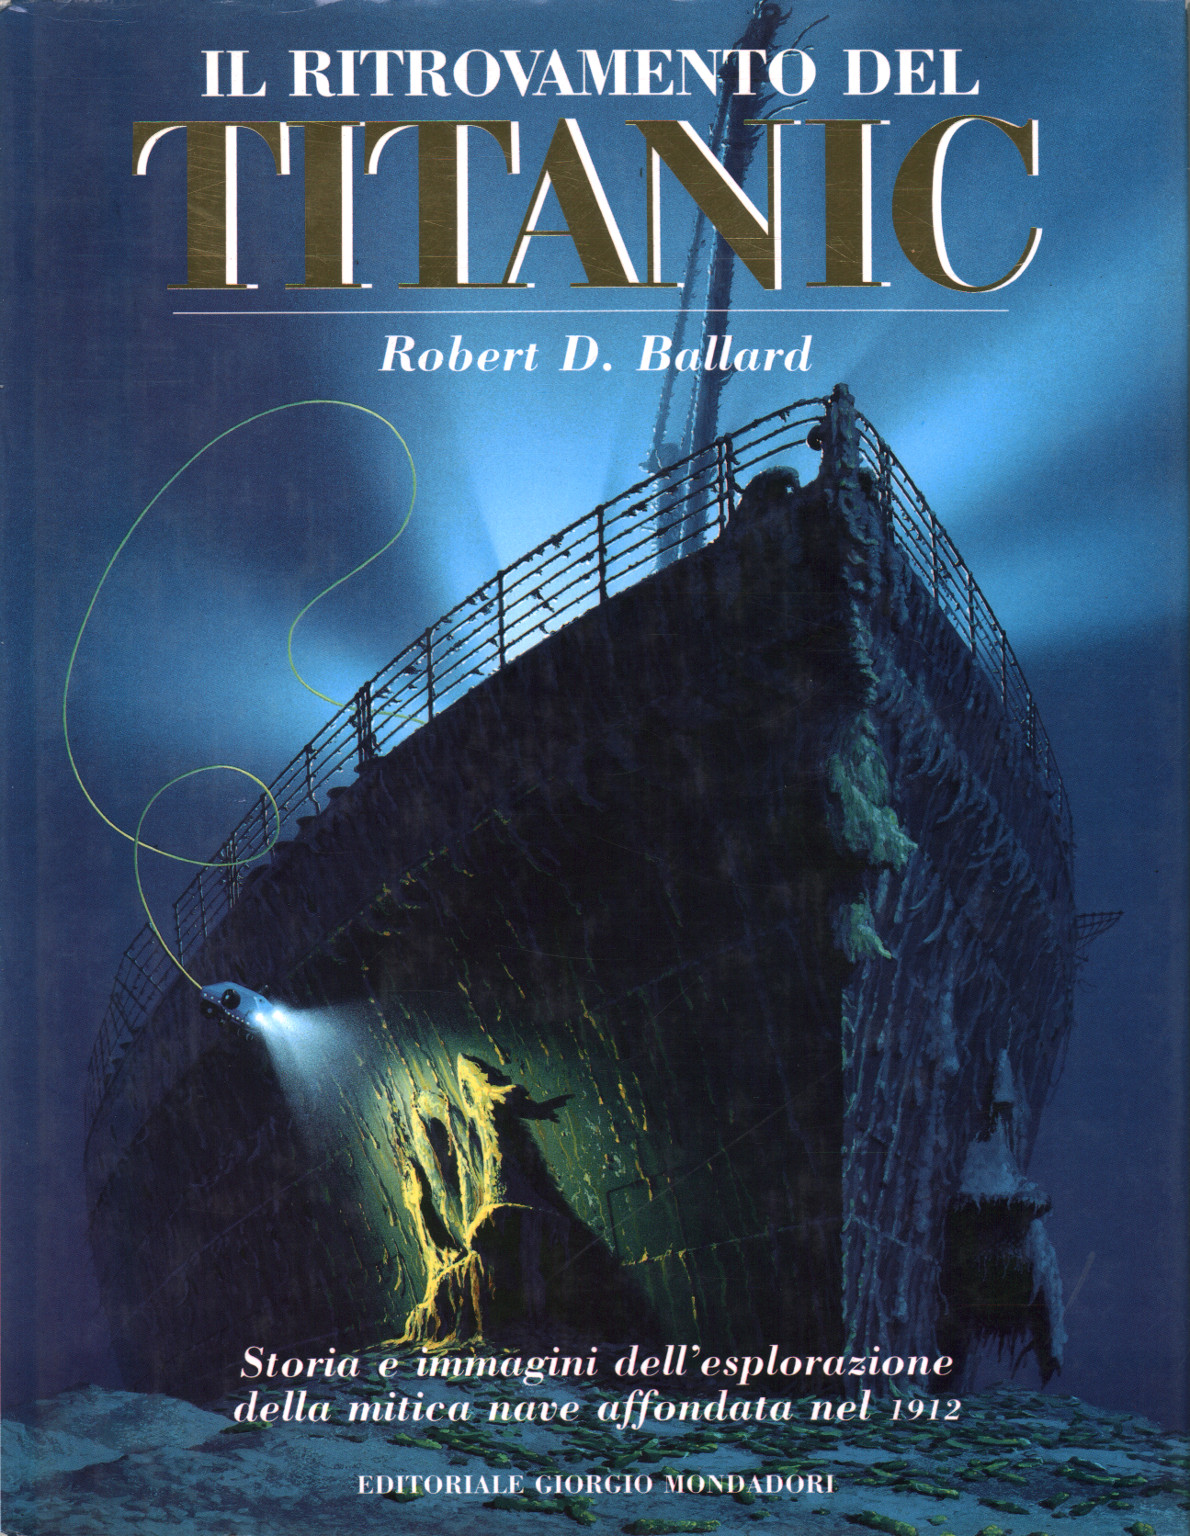 The discovery of the Titanic, s.a.